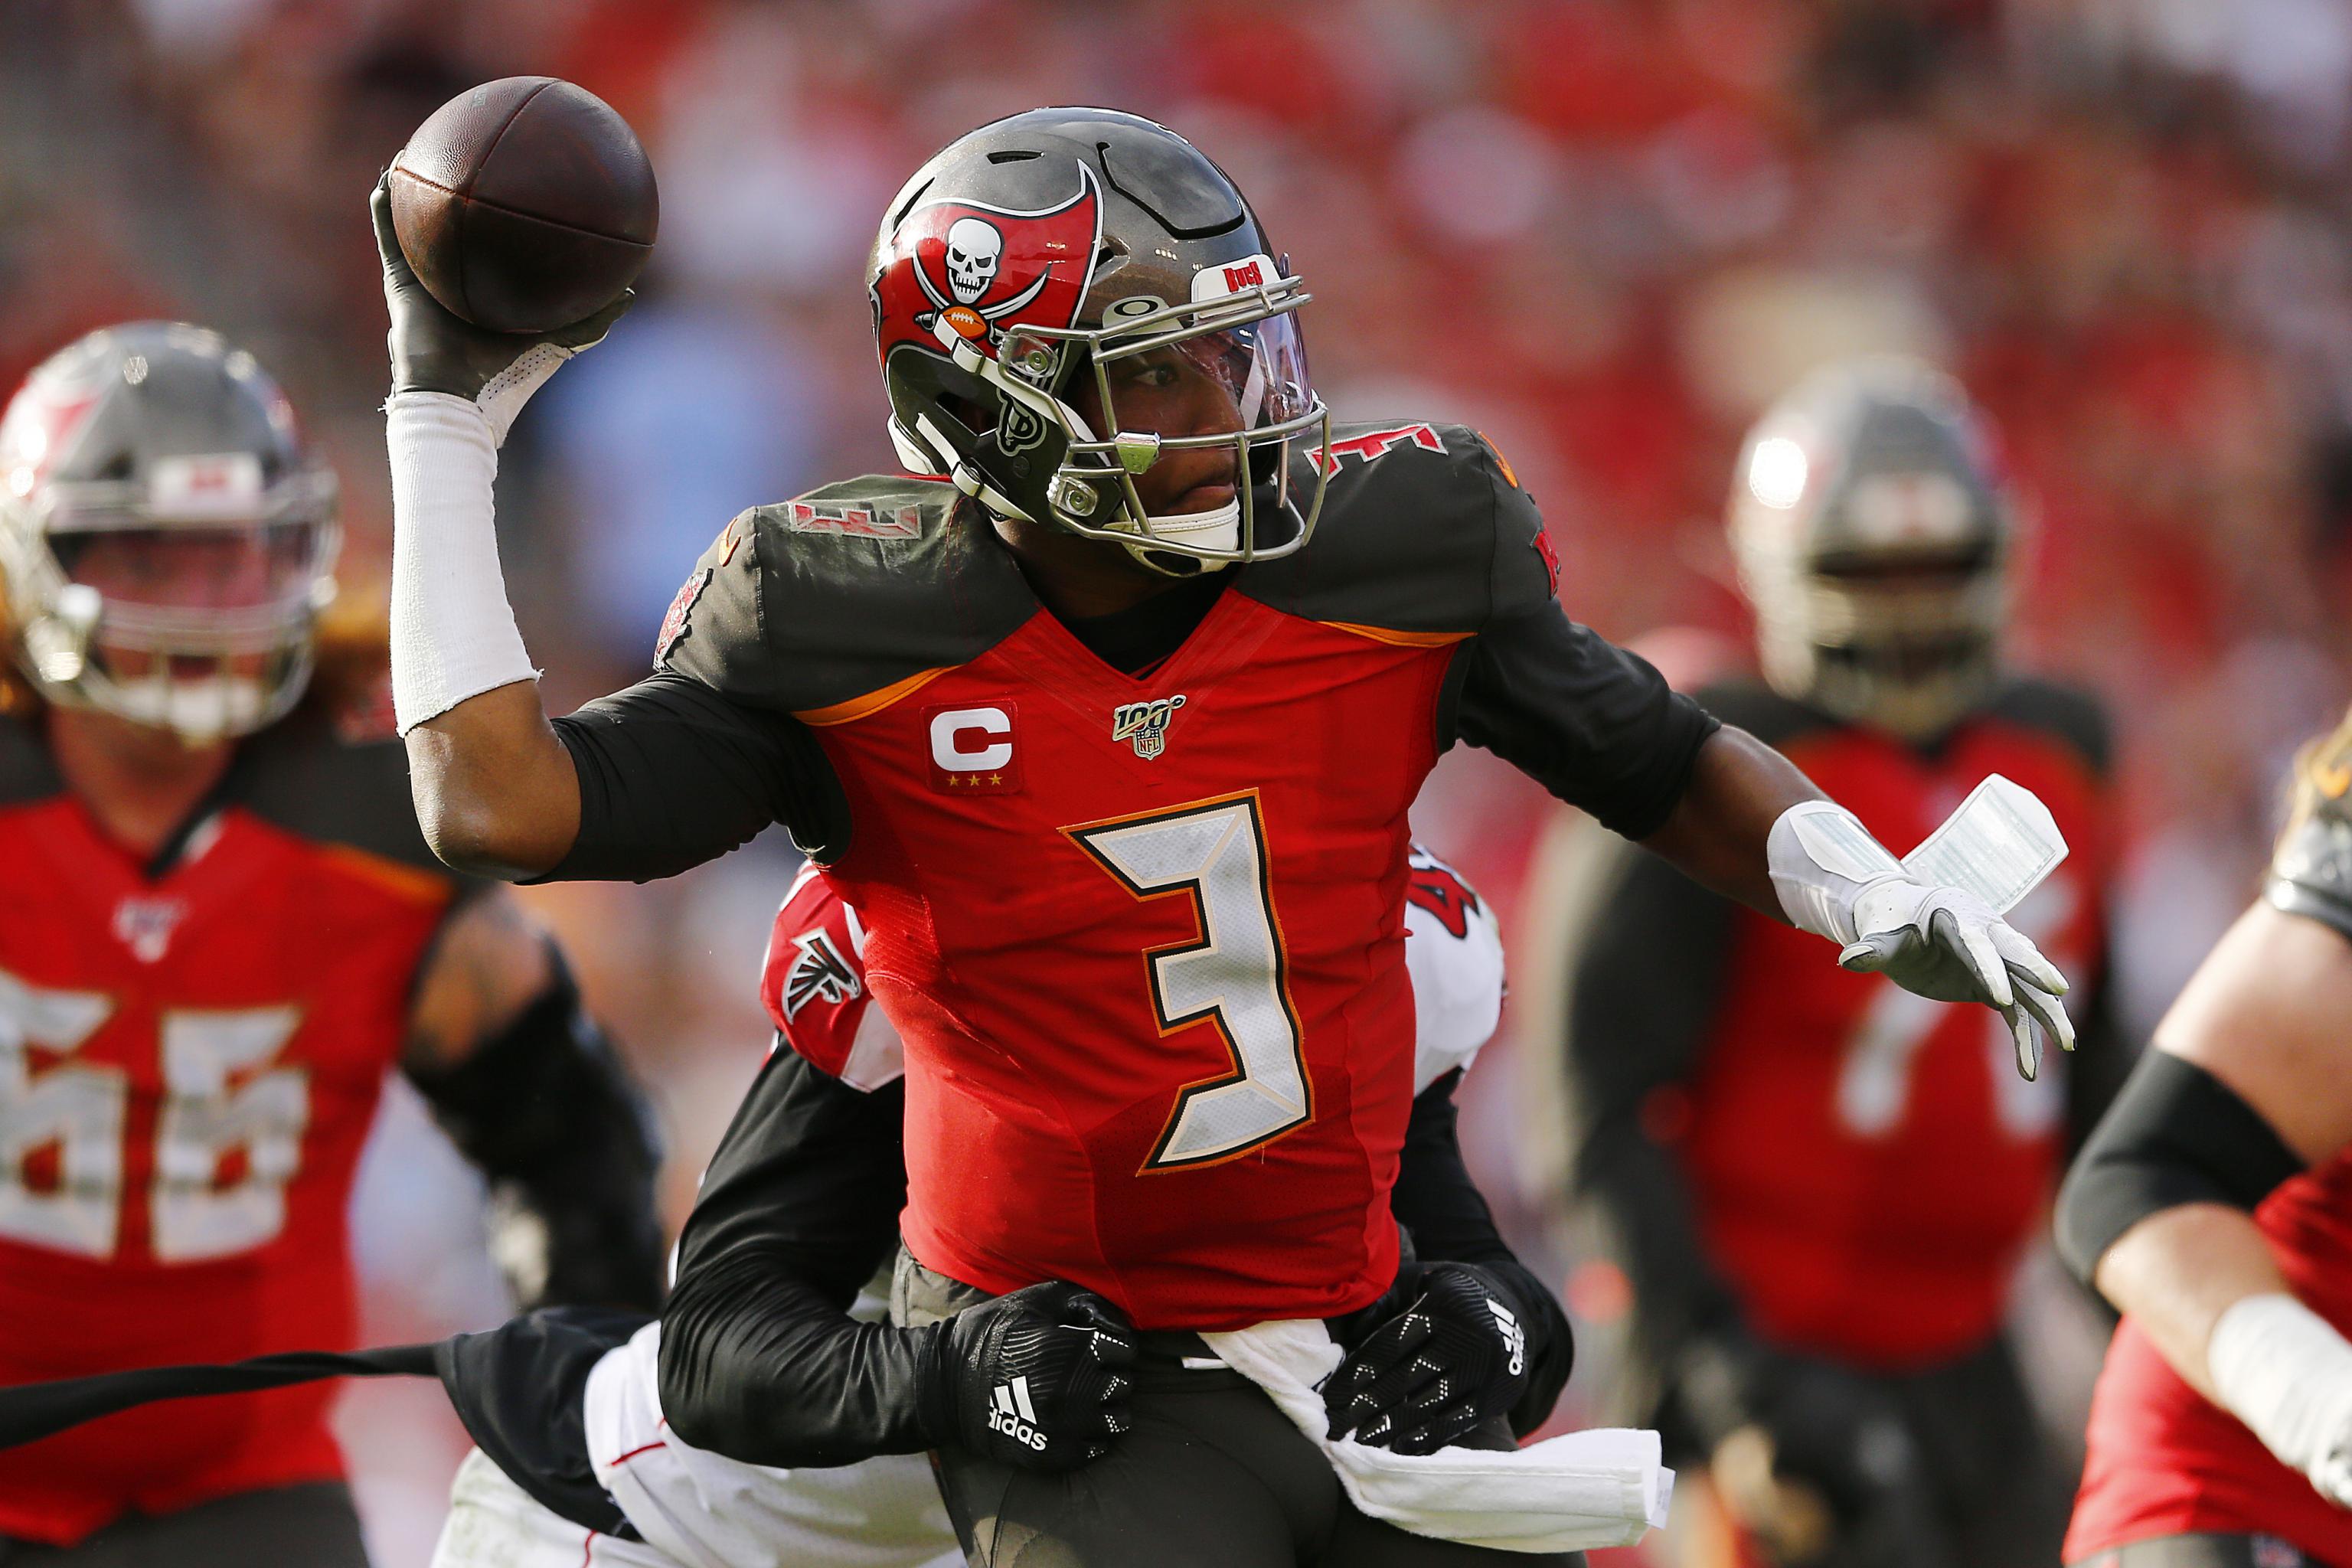 Free-agent-to-be Jameis Winston puts Bucs in a conundrum - Los Angeles Times